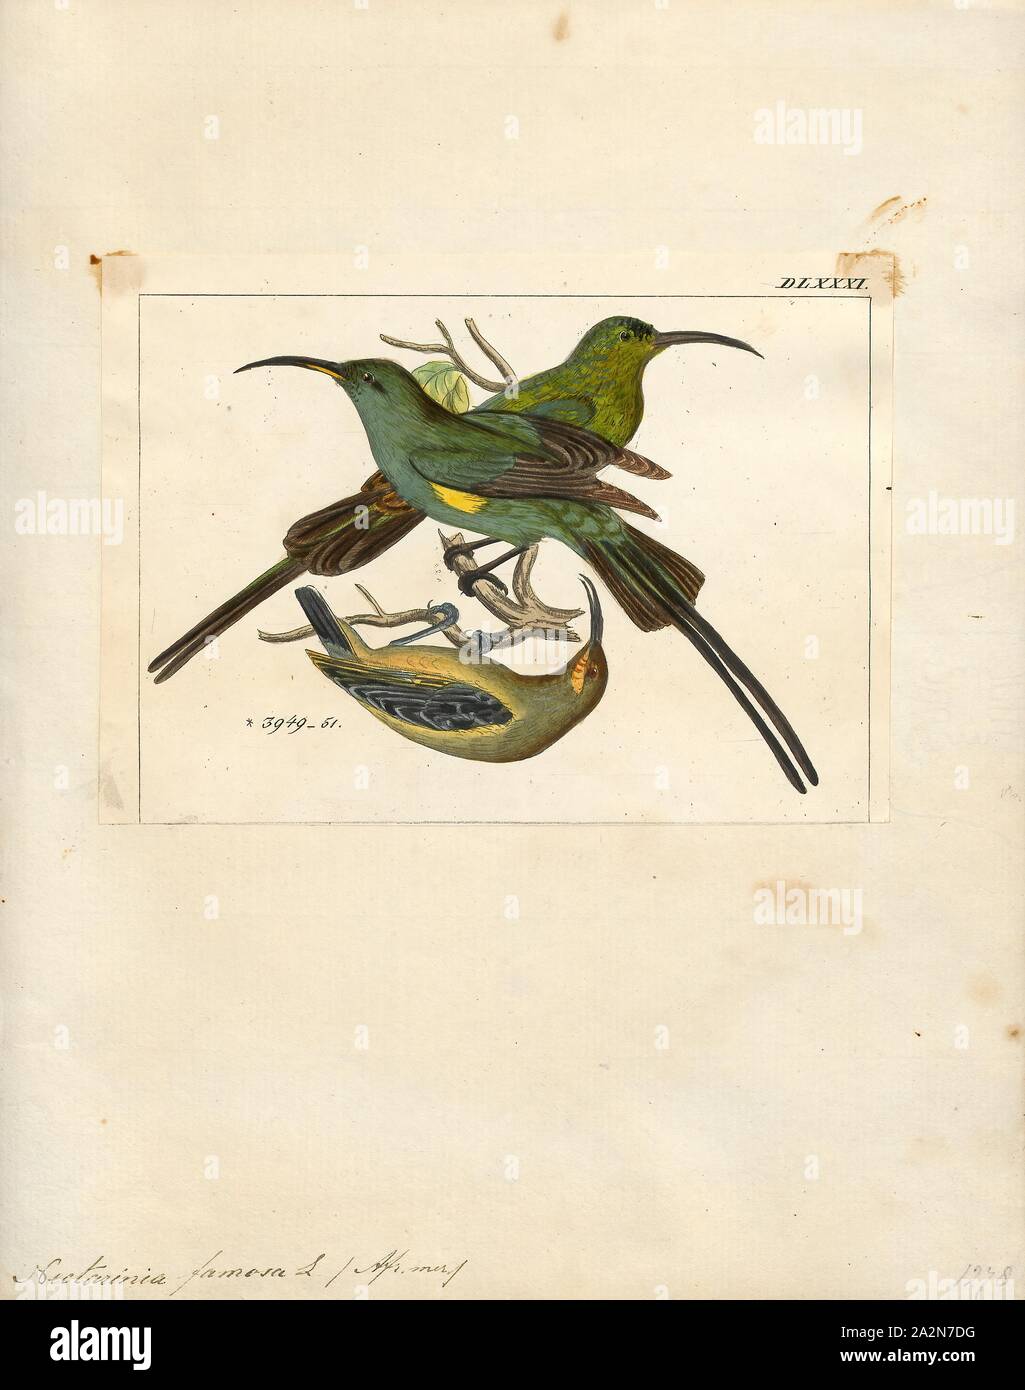 Nectarinia famosa, Print, The malachite sunbird (Nectarinia famosa) is a small nectarivorous bird found from the highlands of Ethiopia southwards to South Africa. They pollinate many flowering plants, particularly those with long corolla tubes, in the Fynbos., 1820-1860 Stock Photo